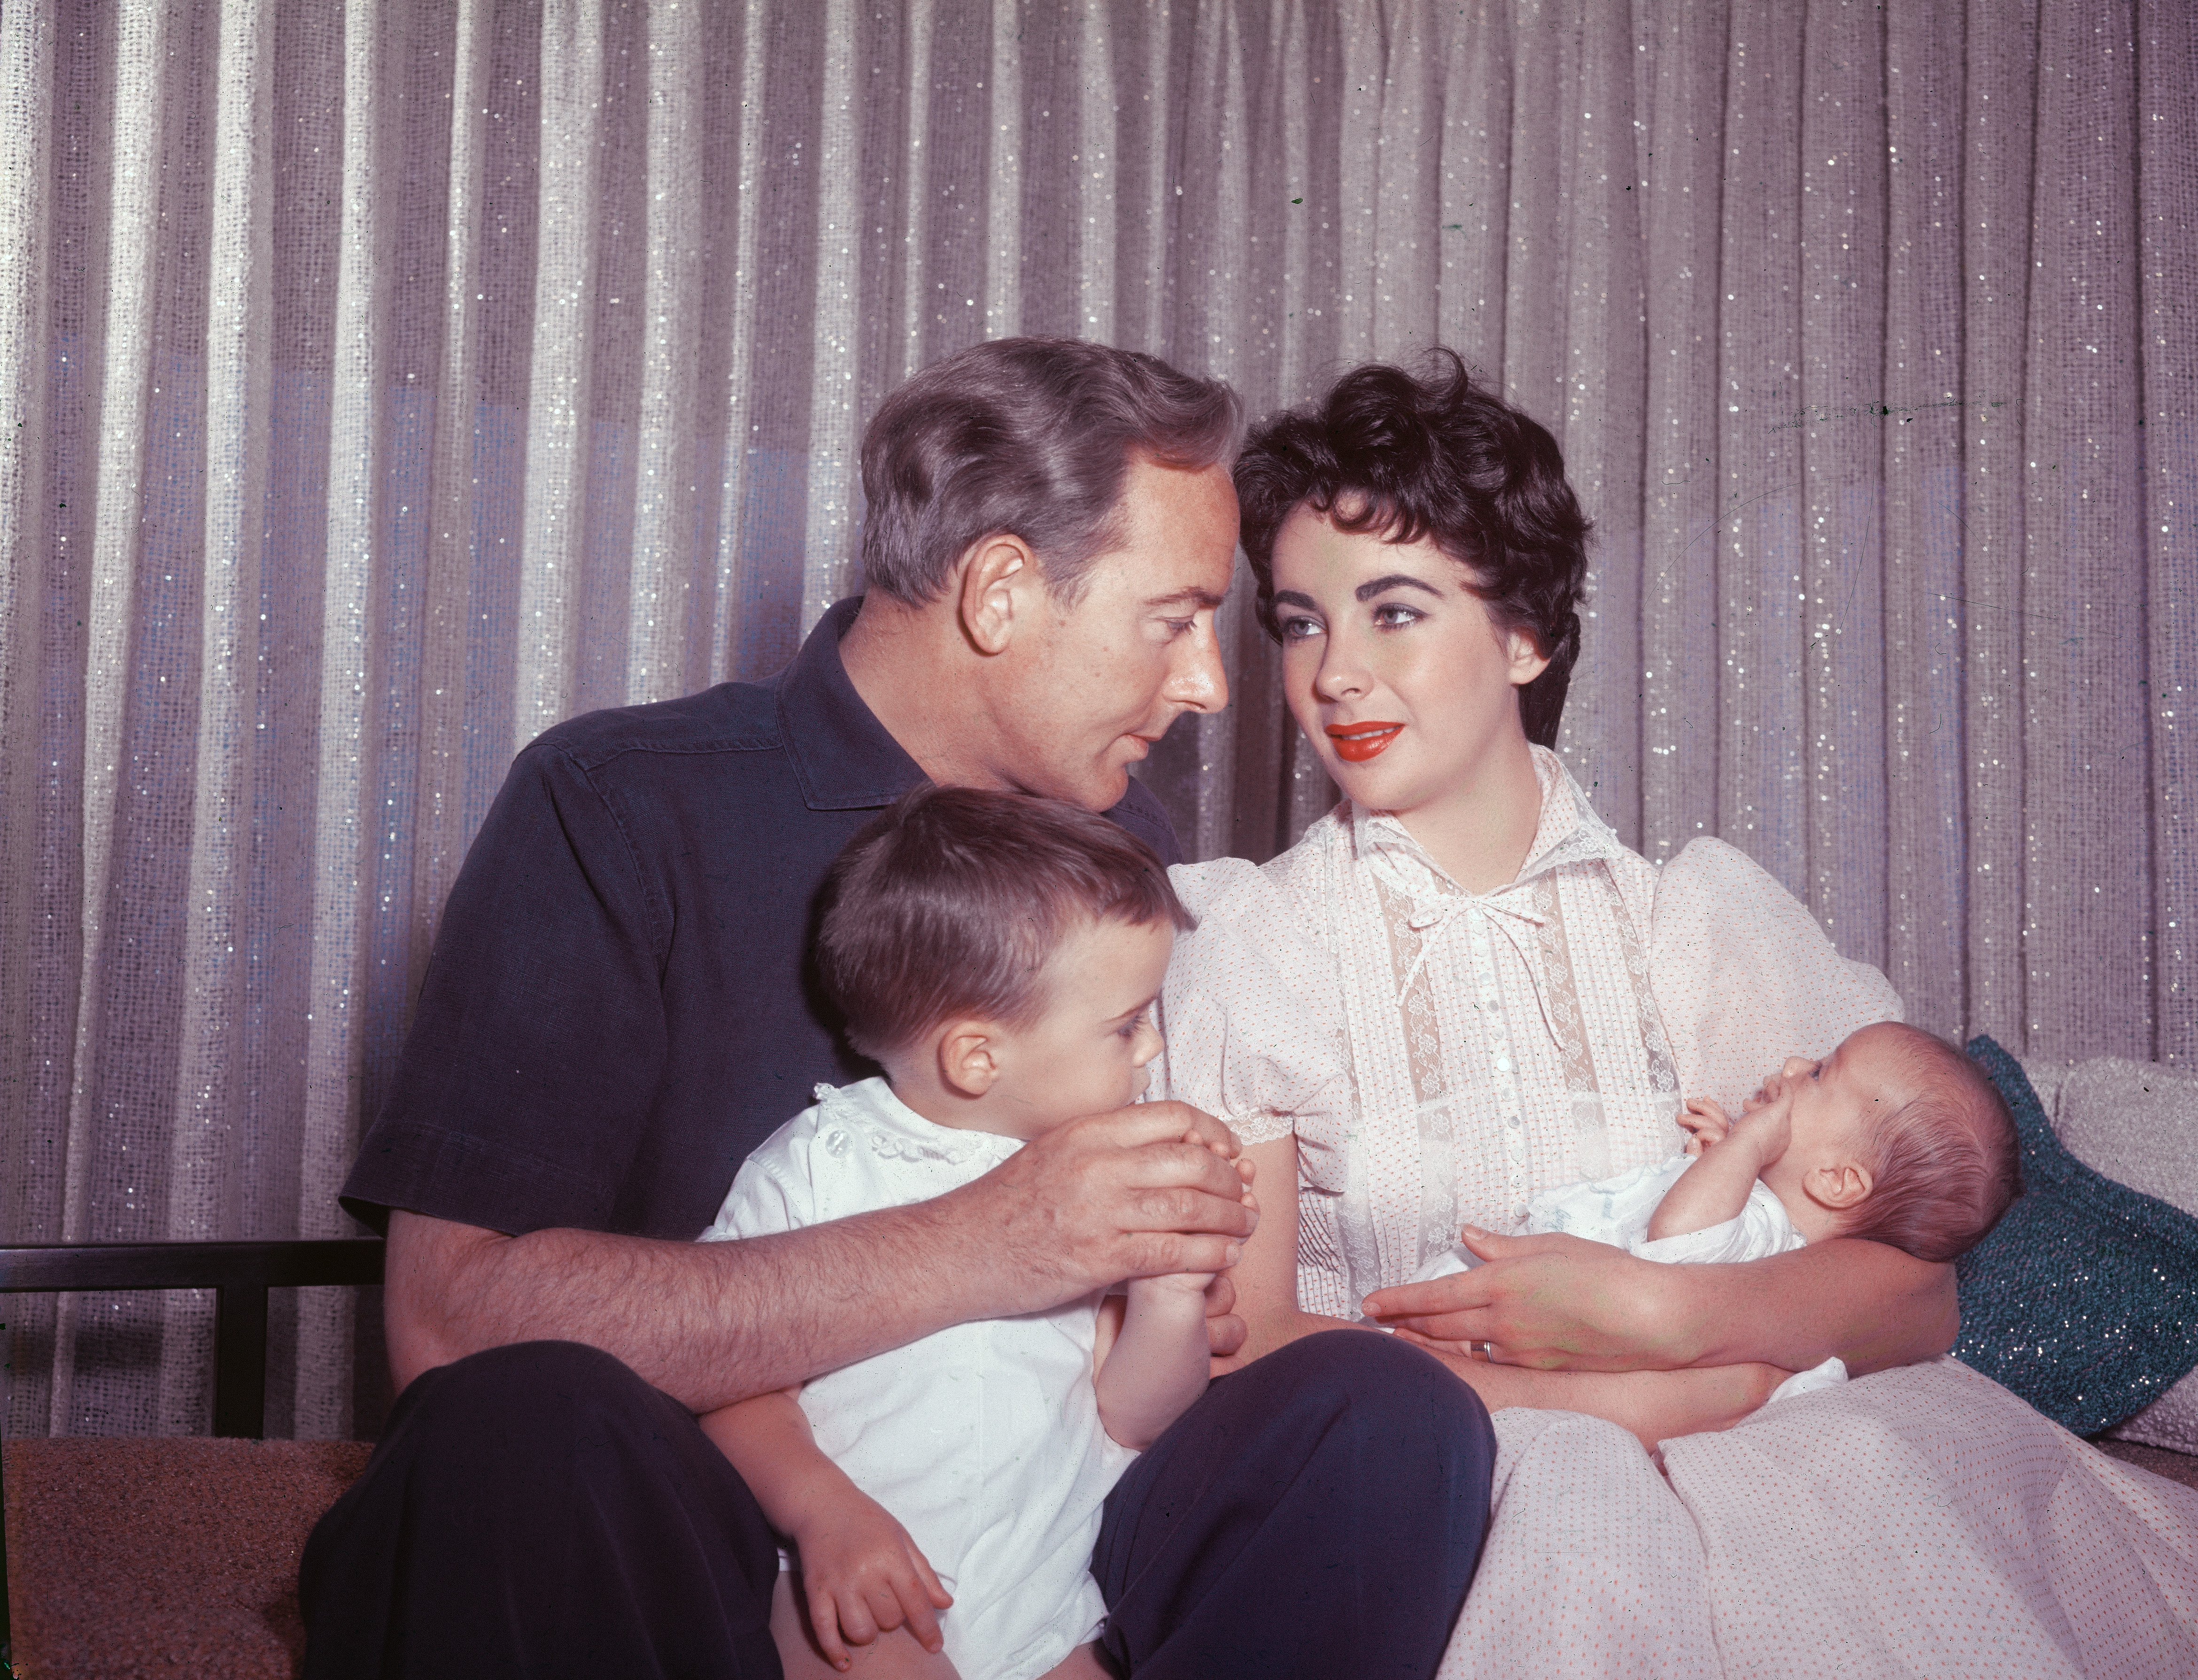 Actors Elizabeth Taylor (1932 - 2011) and Michael Wilding (1912 - 1979) with their sons Michael Jr (left) and newborn Christopher, Los Angeles, California, 1955. | Source: Getty Images